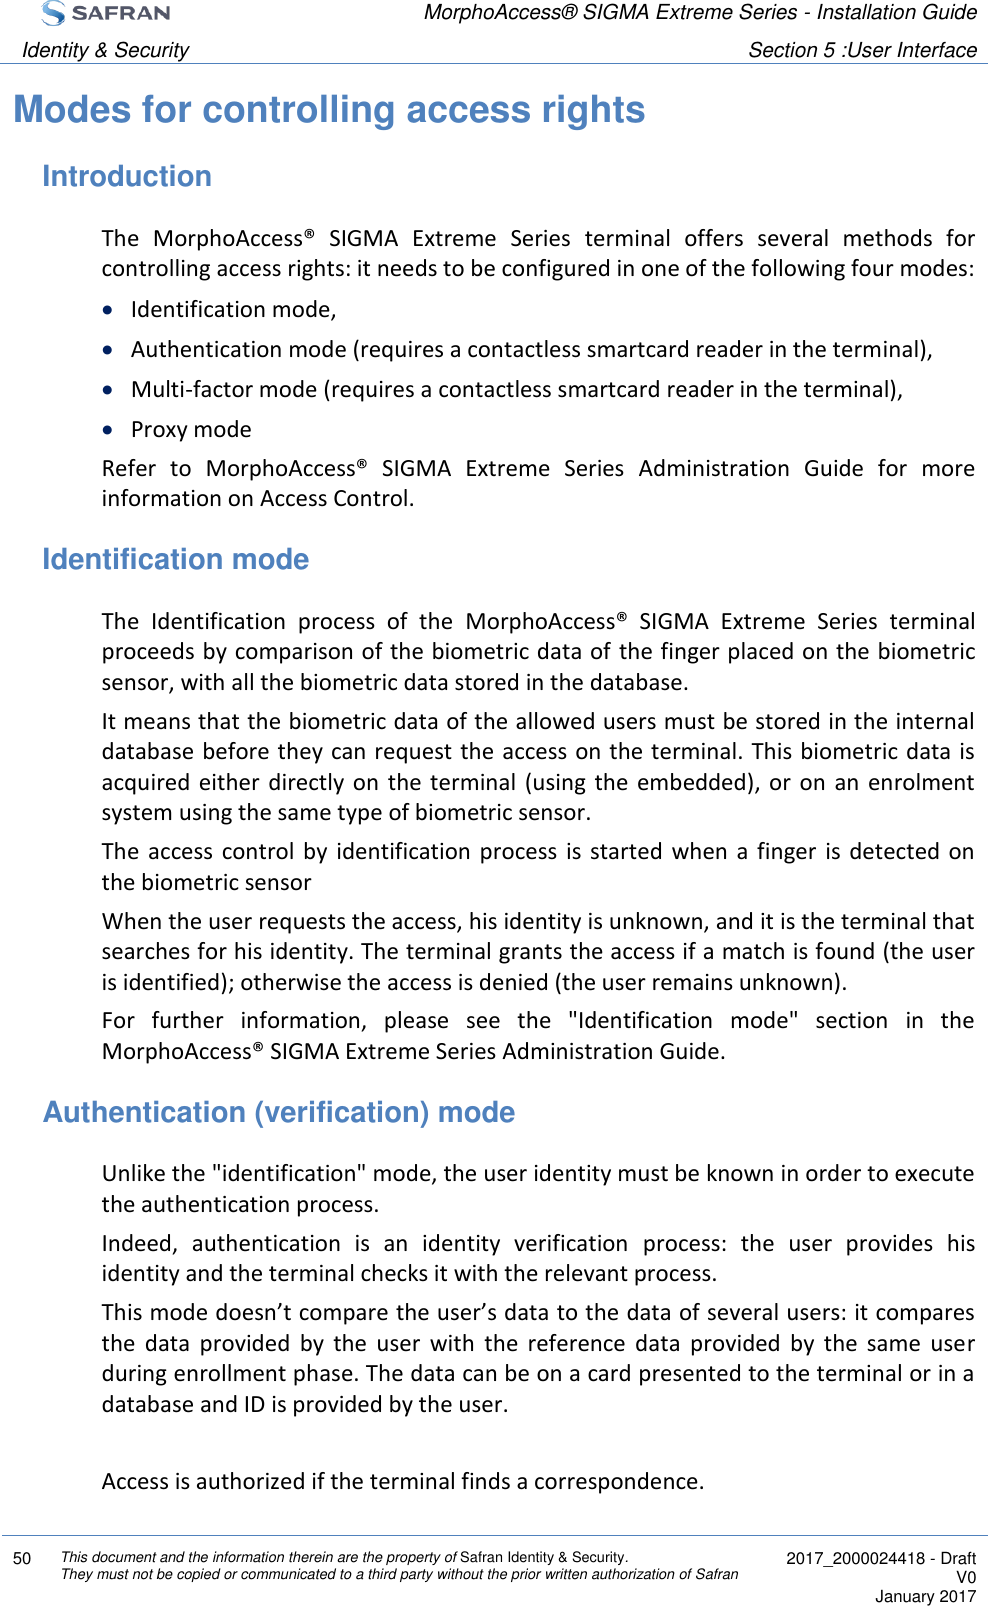  MorphoAccess® SIGMA Extreme Series - Installation Guide  Identity &amp; Security Section 5 :User Interface  50 This document and the information therein are the property of Safran Identity &amp; Security. They must not be copied or communicated to a third party without the prior written authorization of Safran  2017_2000024418 - Draft V0 January 2017  Modes for controlling access rights Introduction The  MorphoAccess®  SIGMA  Extreme  Series  terminal  offers  several  methods  for controlling access rights: it needs to be configured in one of the following four modes:  Identification mode,  Authentication mode (requires a contactless smartcard reader in the terminal),  Multi-factor mode (requires a contactless smartcard reader in the terminal),  Proxy mode Refer  to  MorphoAccess®  SIGMA  Extreme  Series  Administration  Guide  for  more information on Access Control. Identification mode The  Identification  process  of  the  MorphoAccess®  SIGMA  Extreme  Series  terminal proceeds by comparison of the biometric data of the finger placed on the biometric sensor, with all the biometric data stored in the database. It means that the biometric data of the allowed users must be stored in the internal database before they can request the access on the terminal. This biometric data is acquired  either  directly on  the  terminal  (using  the  embedded),  or  on  an  enrolment system using the same type of biometric sensor. The  access  control by  identification process  is  started  when  a  finger  is  detected  on the biometric sensor When the user requests the access, his identity is unknown, and it is the terminal that searches for his identity. The terminal grants the access if a match is found (the user is identified); otherwise the access is denied (the user remains unknown). For  further  information,  please  see  the  &quot;Identification  mode&quot;  section  in  the MorphoAccess® SIGMA Extreme Series Administration Guide. Authentication (verification) mode Unlike the &quot;identification&quot; mode, the user identity must be known in order to execute the authentication process. Indeed,  authentication  is  an  identity  verification  process:  the  user  provides  his identity and the terminal checks it with the relevant process. This mode doesn’t compare the user’s data to the data of several users: it compares the  data  provided  by  the  user  with  the  reference  data  provided  by  the  same  user during enrollment phase. The data can be on a card presented to the terminal or in a database and ID is provided by the user.  Access is authorized if the terminal finds a correspondence. 